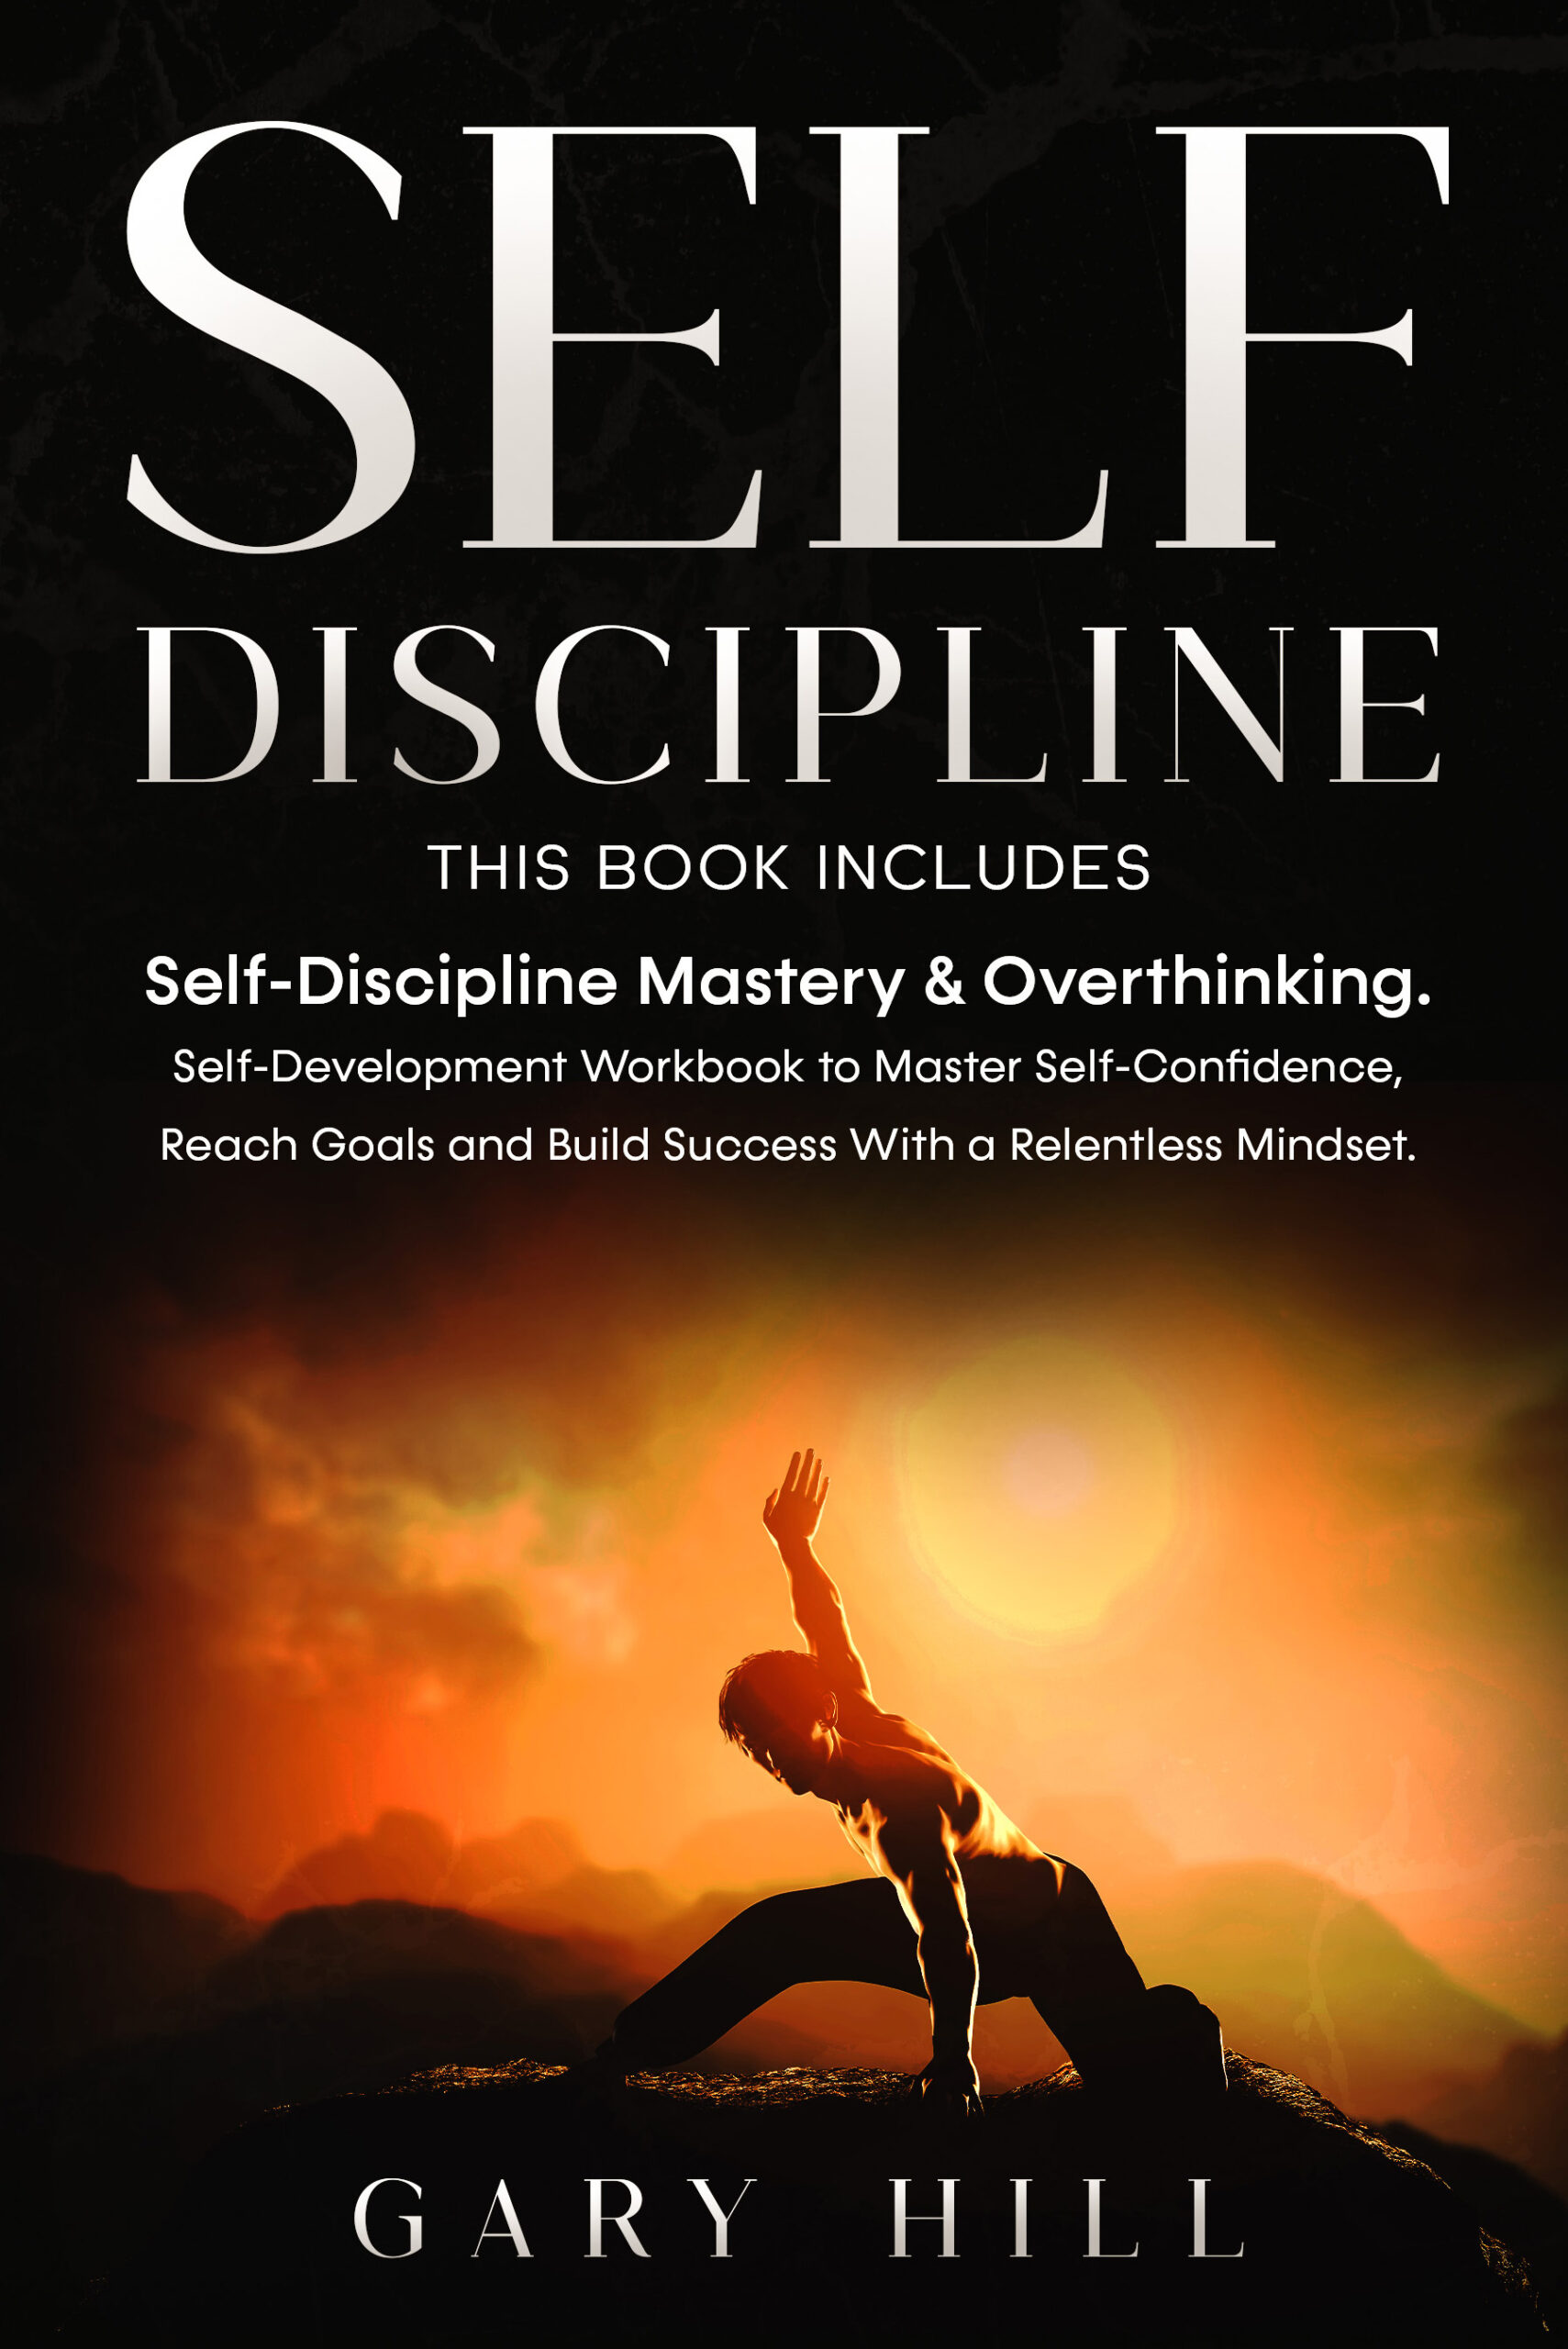 FREE: Self-Discipline: This Book Includes: Self-Discipline Mastery & Overthinking. Self-Development Workbook to Master Self-Confidence, Reach Goals and Build Success With a Relentless Mindset. by Gary Hill